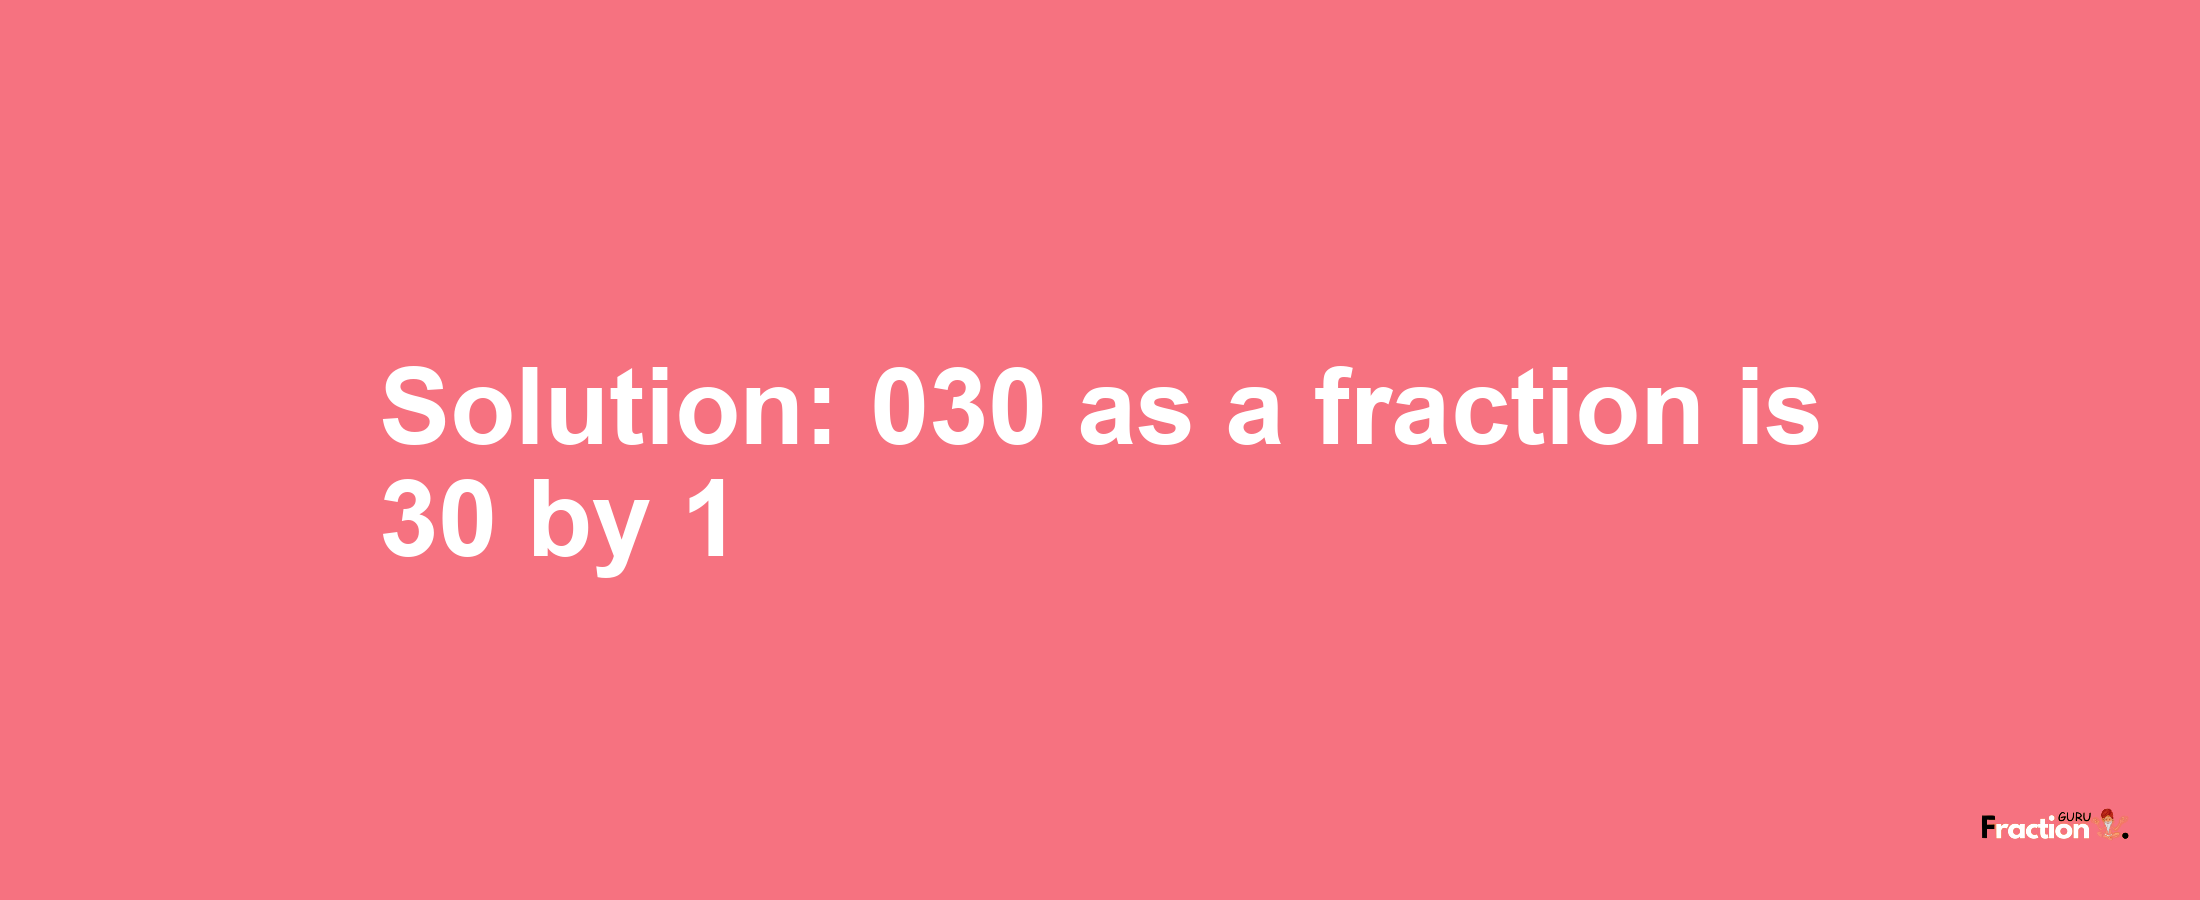 Solution:030 as a fraction is 30/1